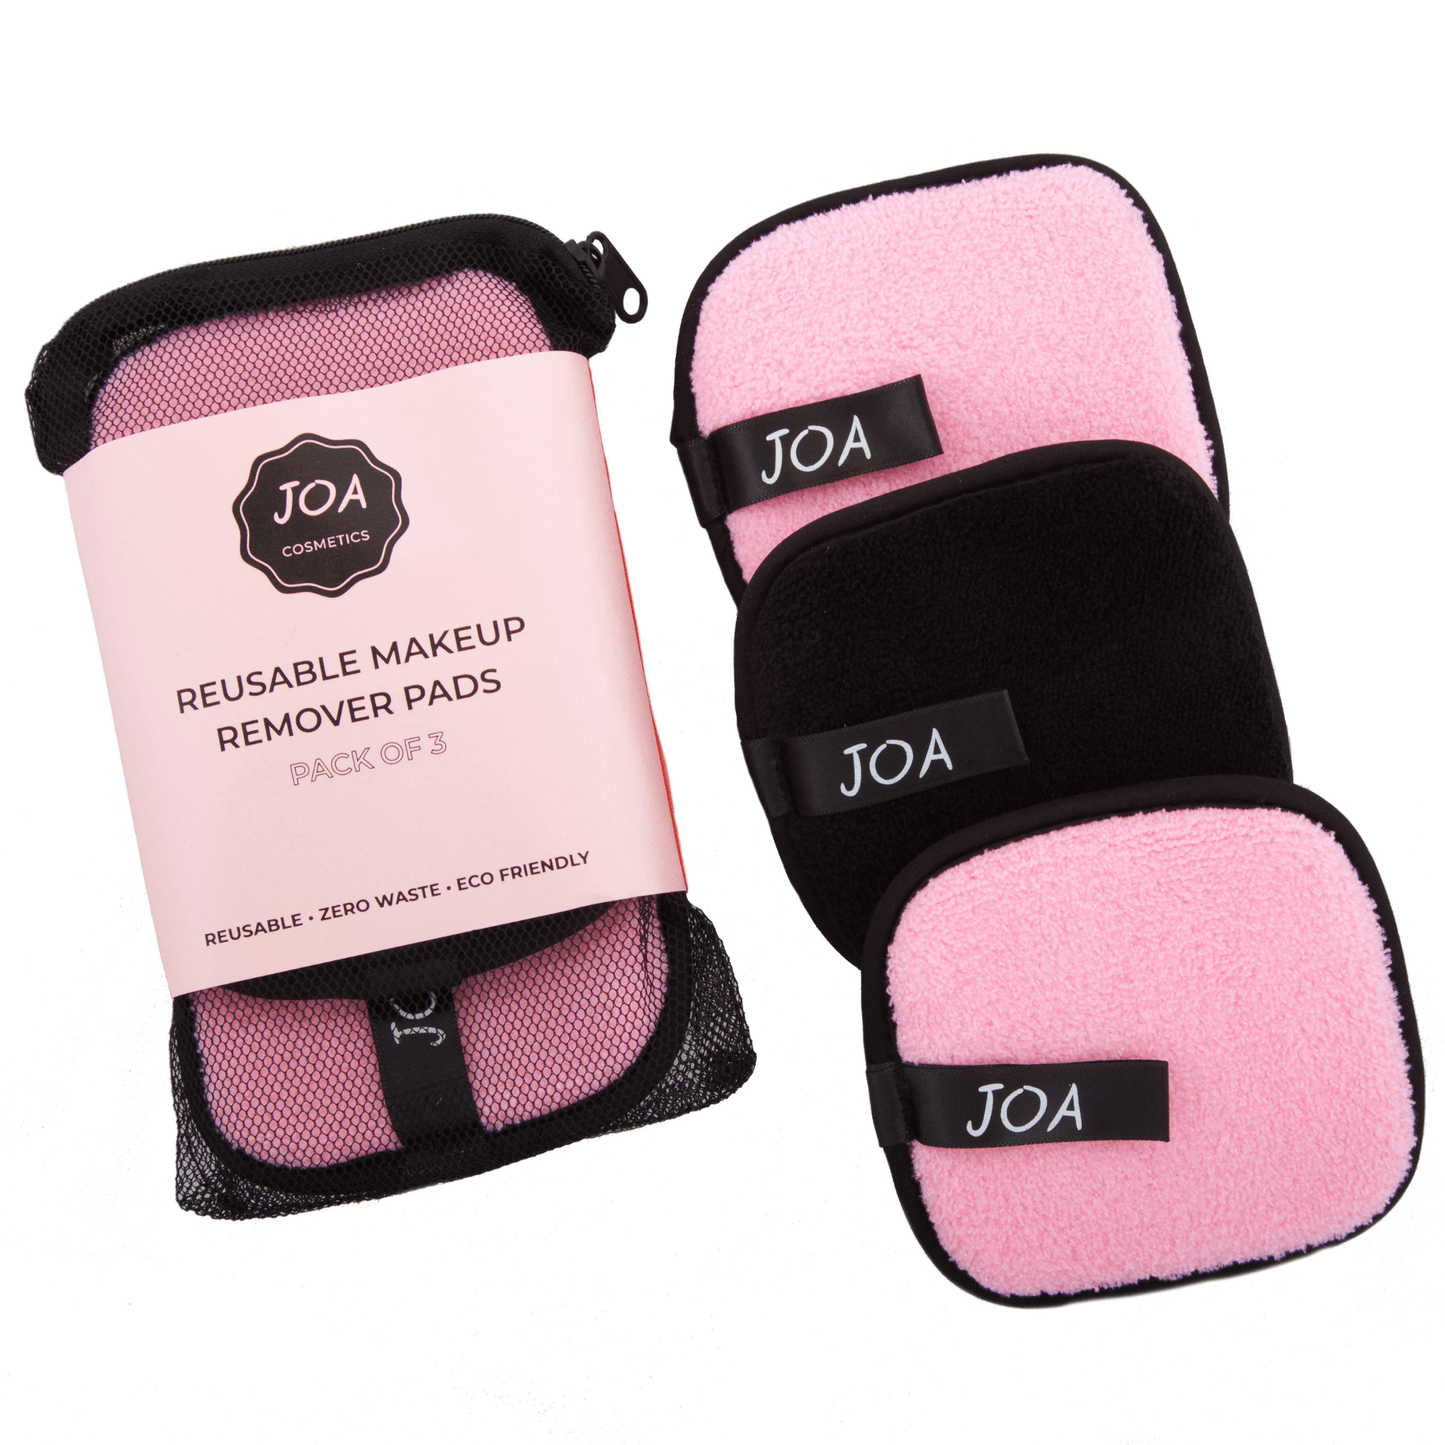 The best reusable makeup remover pads.These pads help you remove your makeup and cleanse your face with water only.They are eco friendly, and cost-efficient as they can be used and washed multiple times.